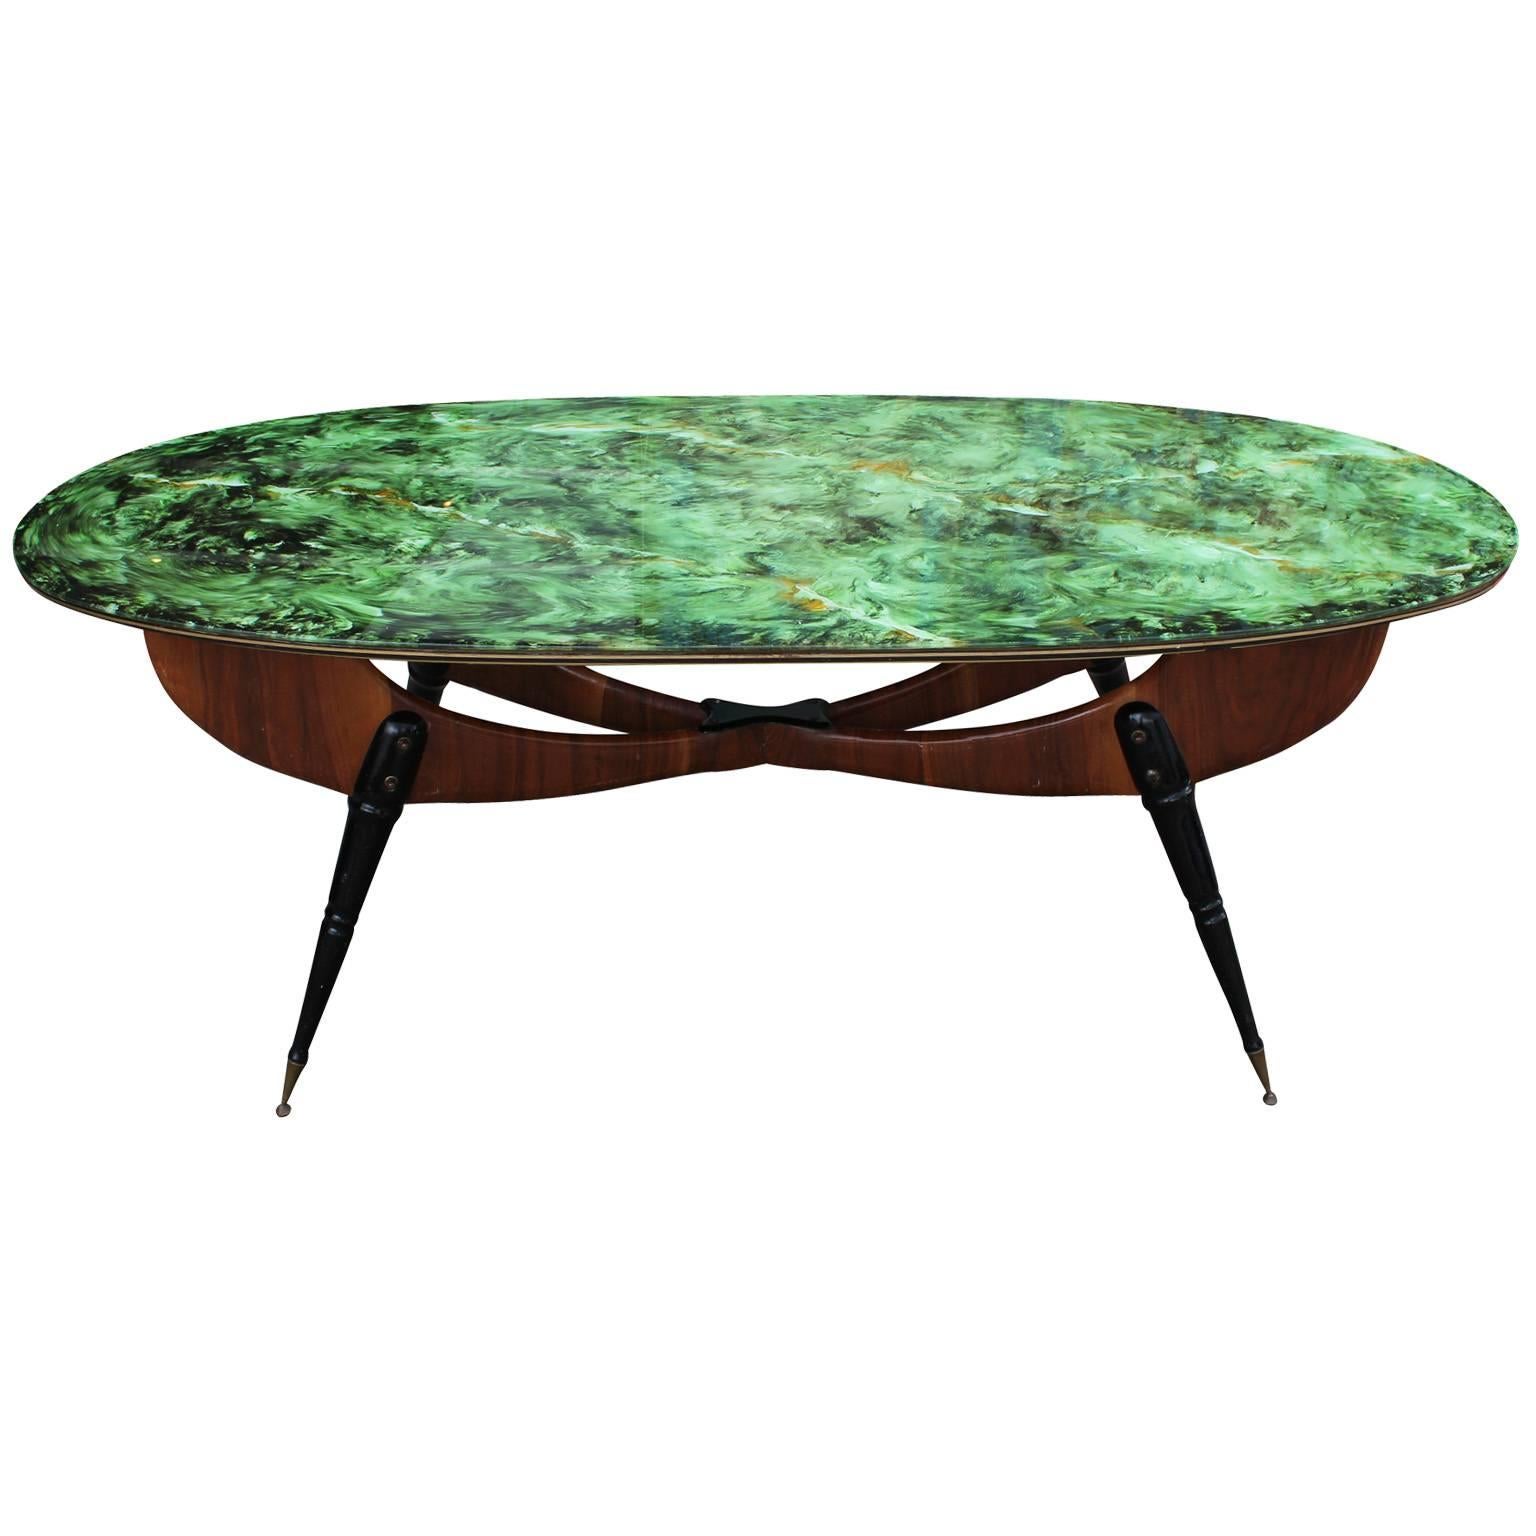 Stunning Italian oval shaped dining table. Reverse painted tabletop is in a kelly green faux marble. Sculptural base is an interesting take on the Classic X-stretcher. Dimensional stretcher is finished with four turned wood legs in black lacquer.